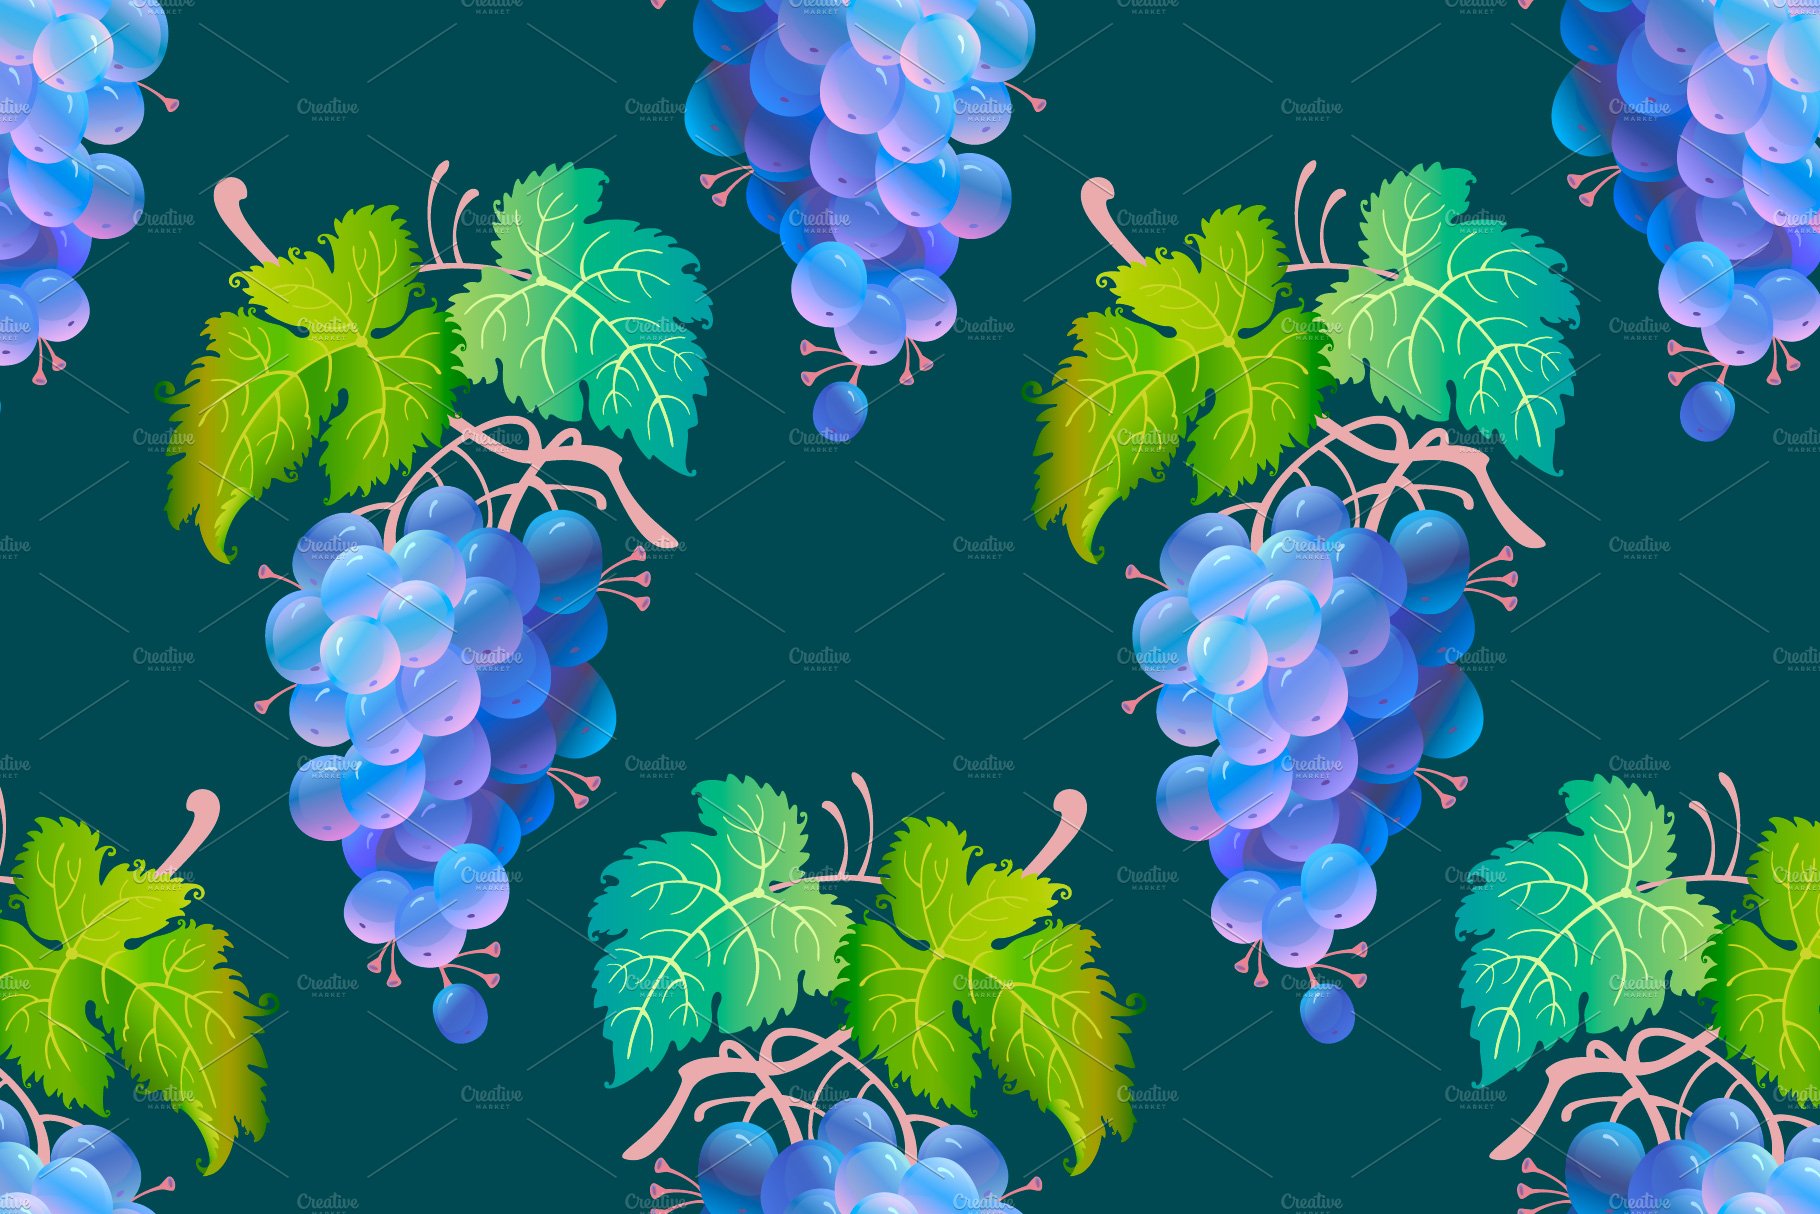 Grapes. Art and pattern preview image.